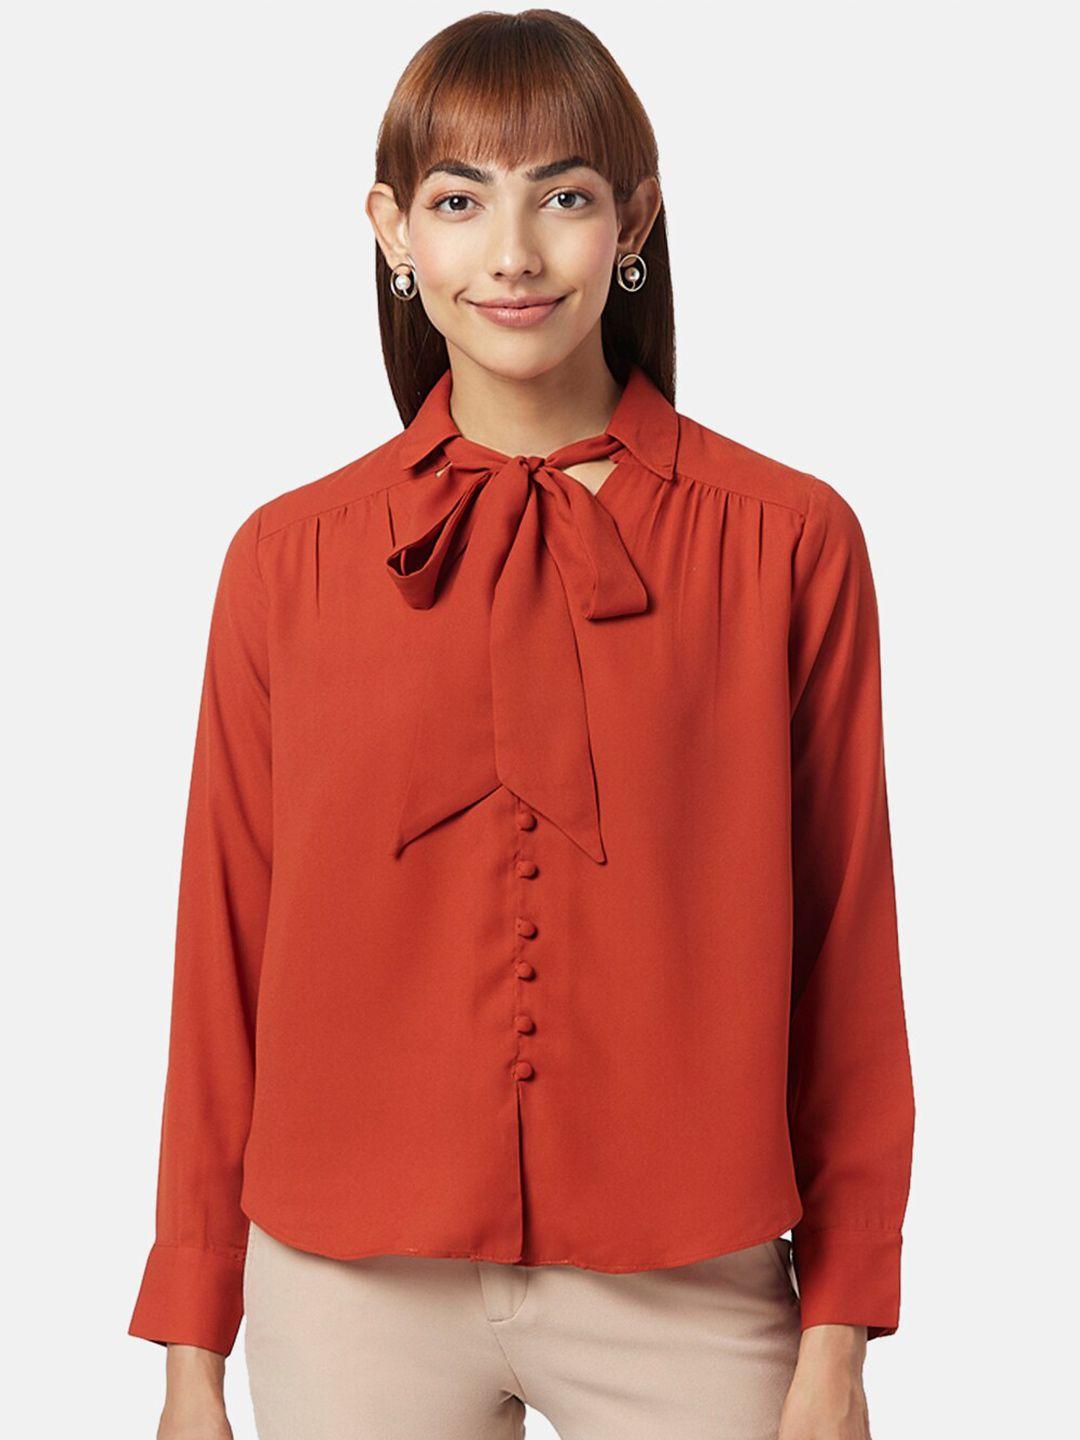 annabelle by pantaloons tie-up neck shirt style top